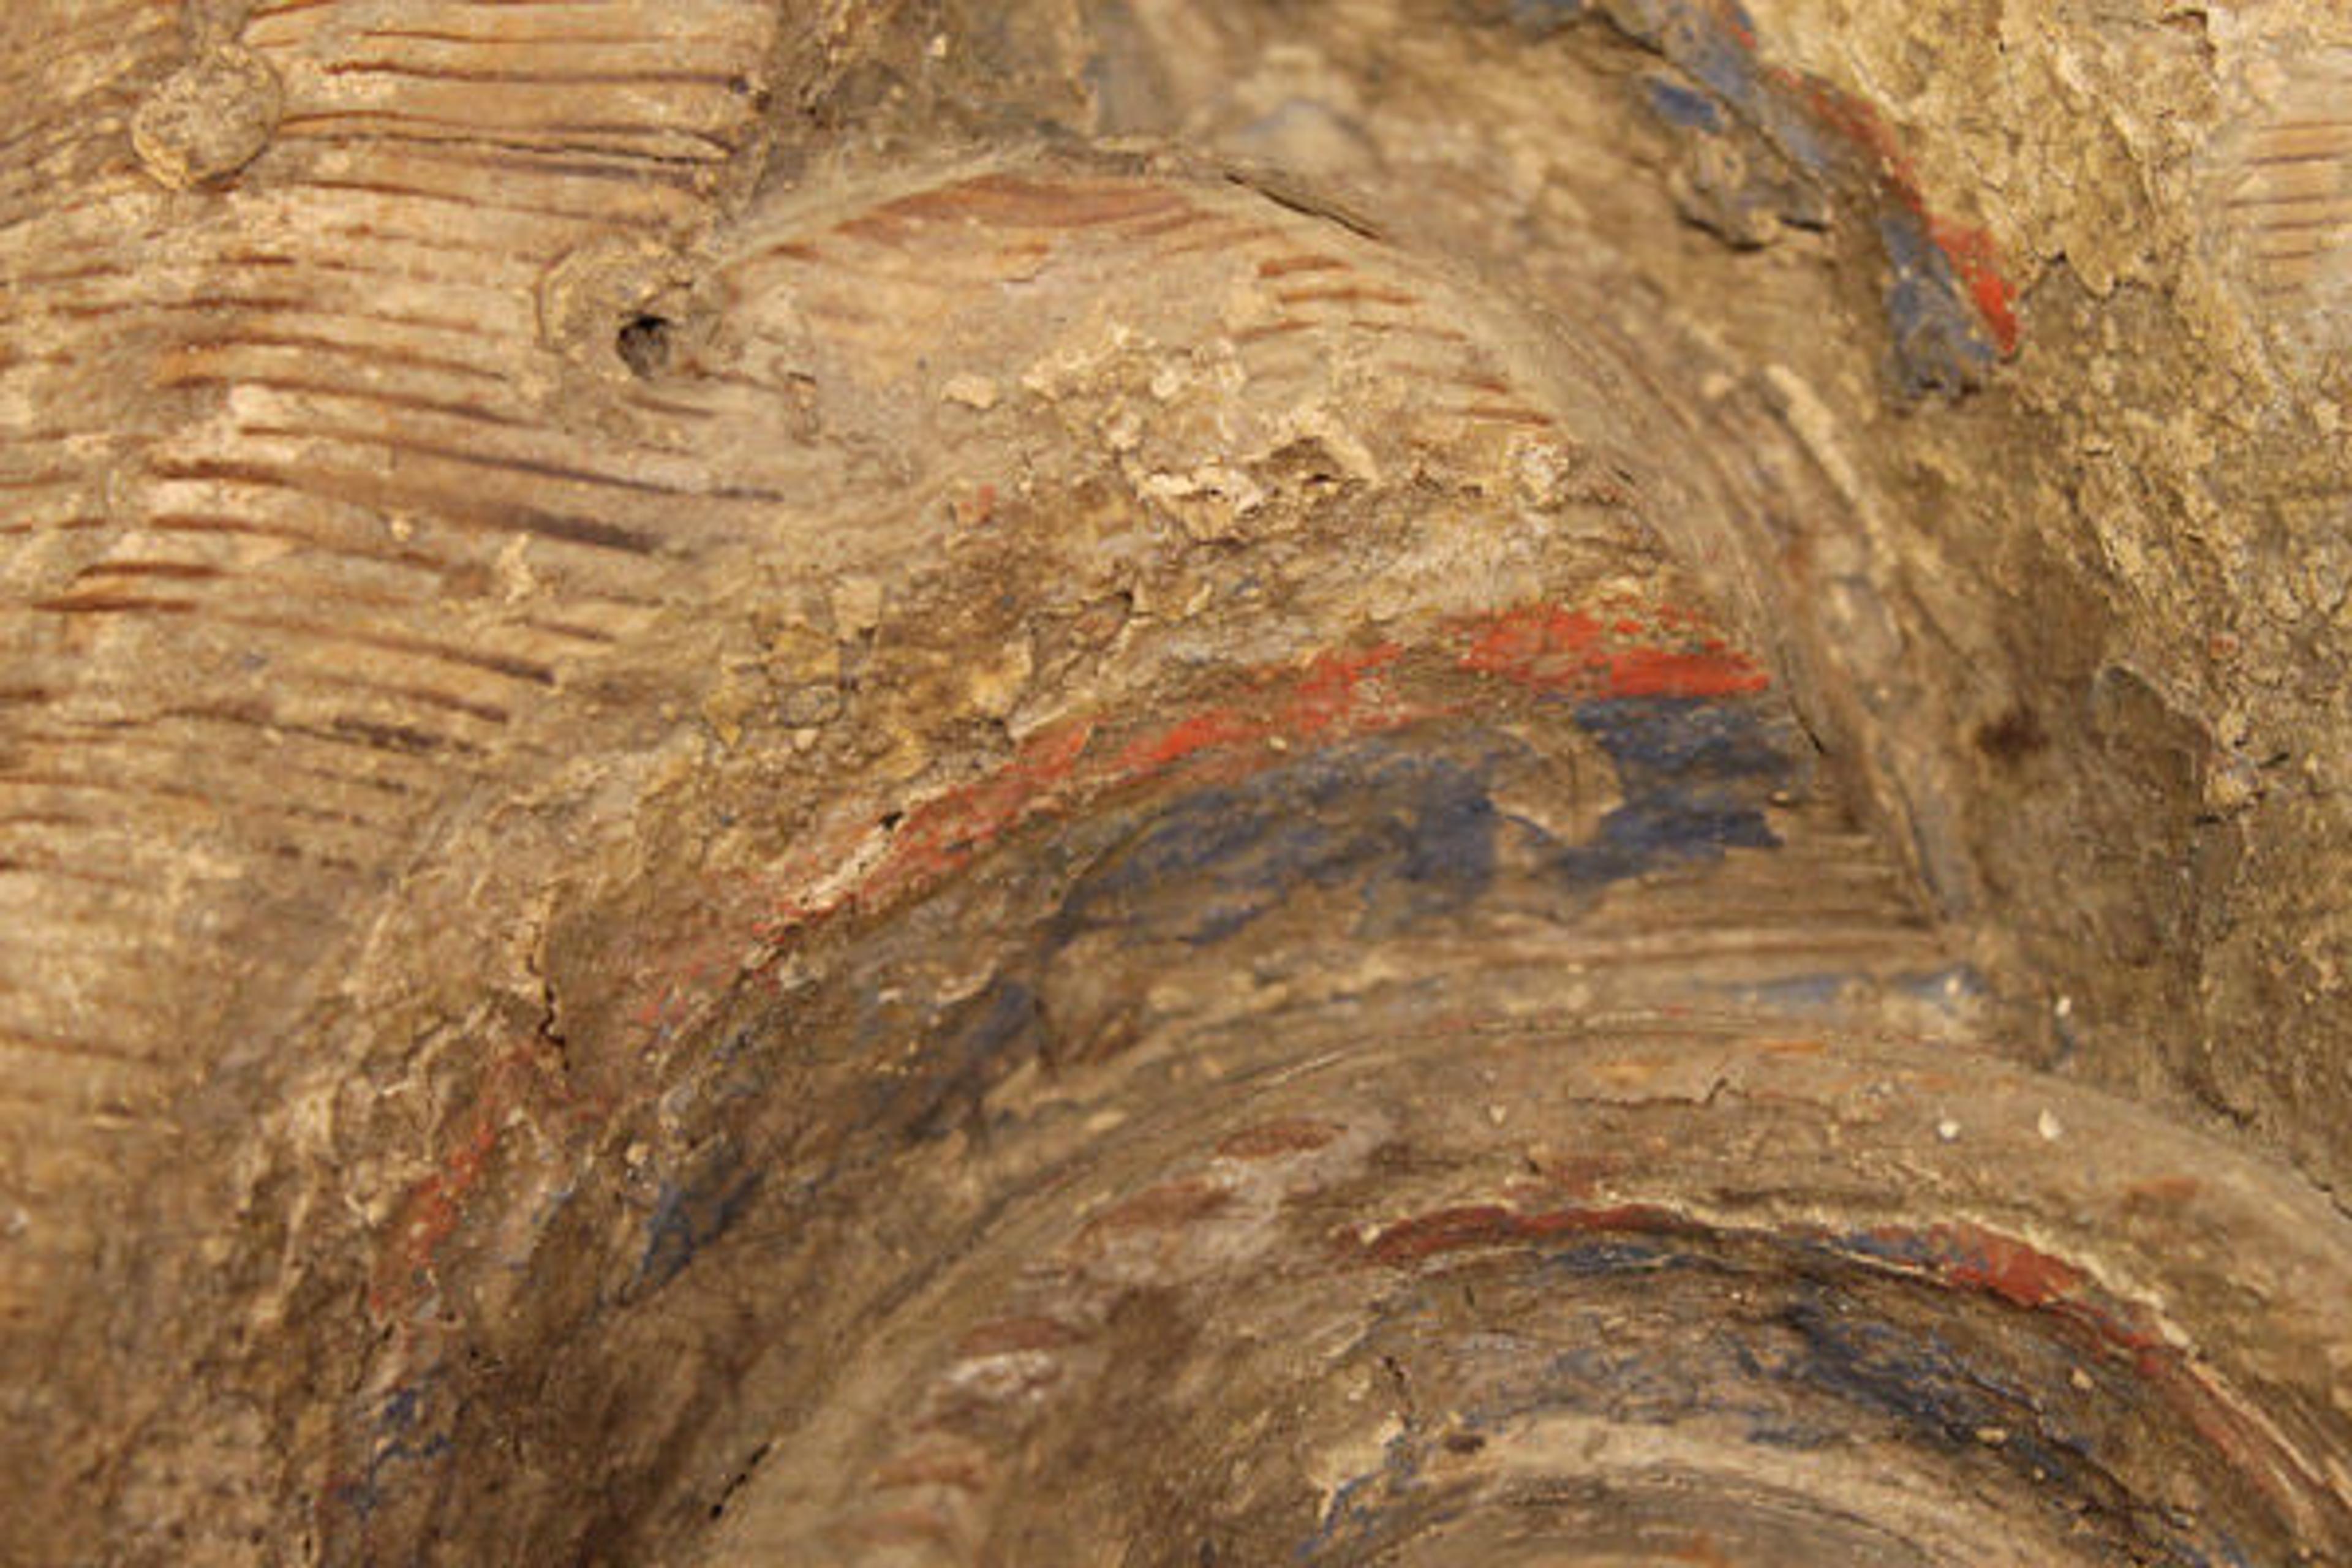 Detail of 32.102.1,2 showing traces of blue and red paint clinging to the surface